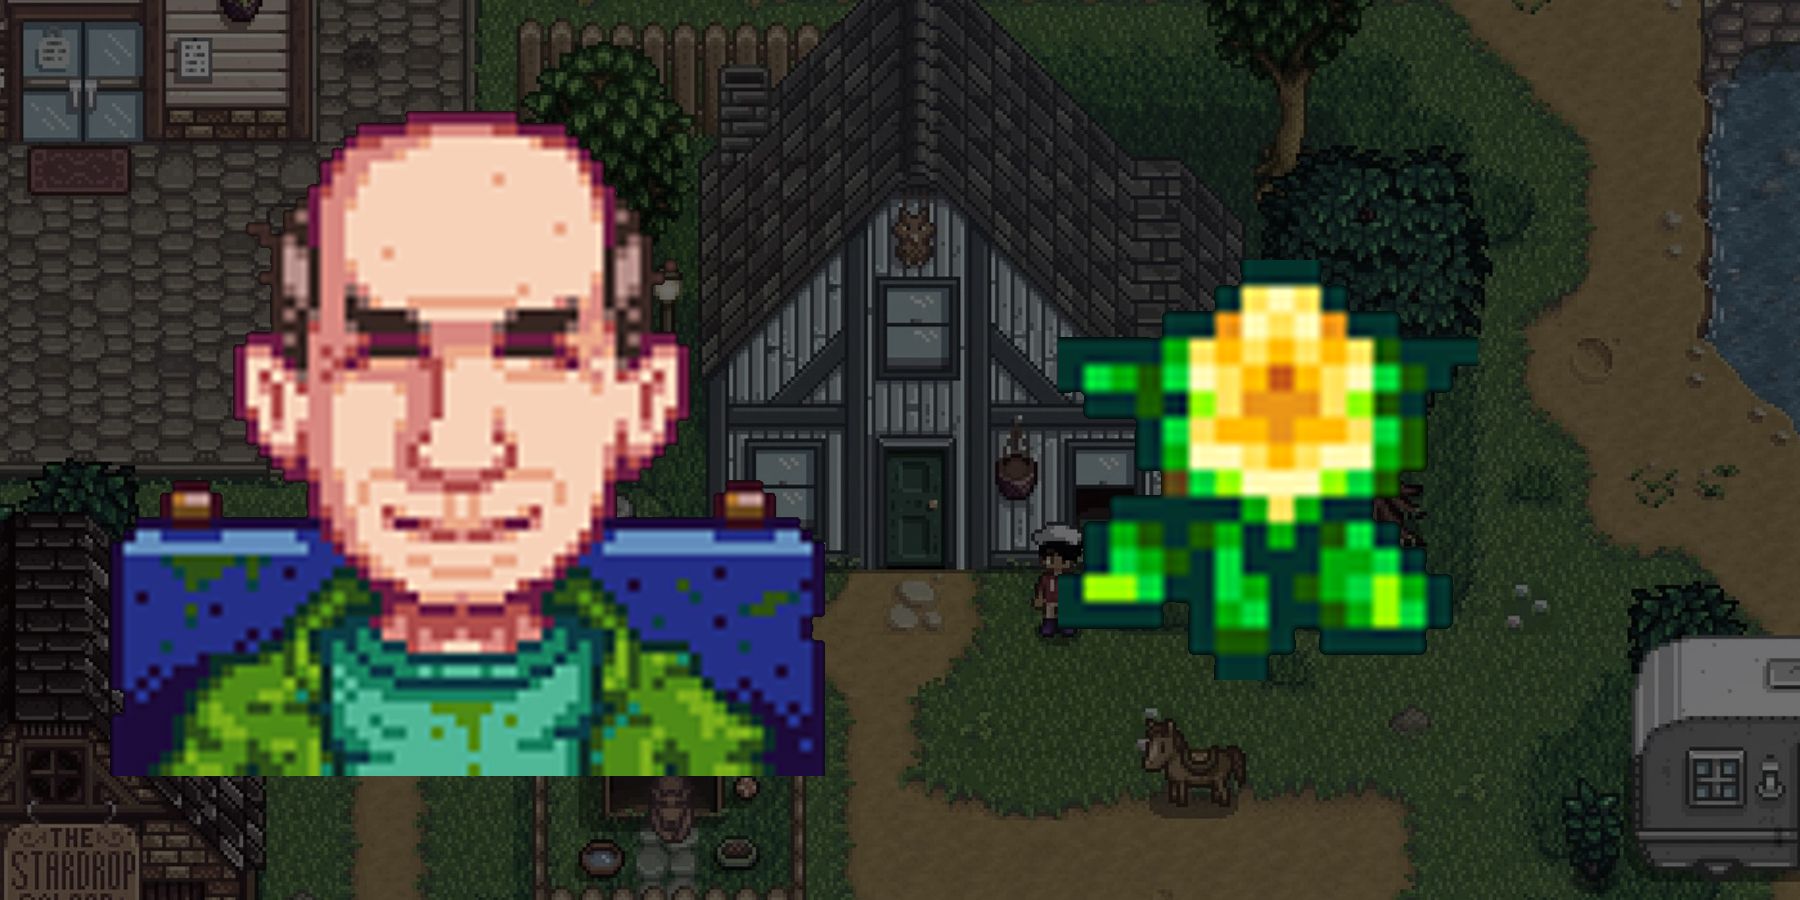 Things that George Likes in Stardew Valley